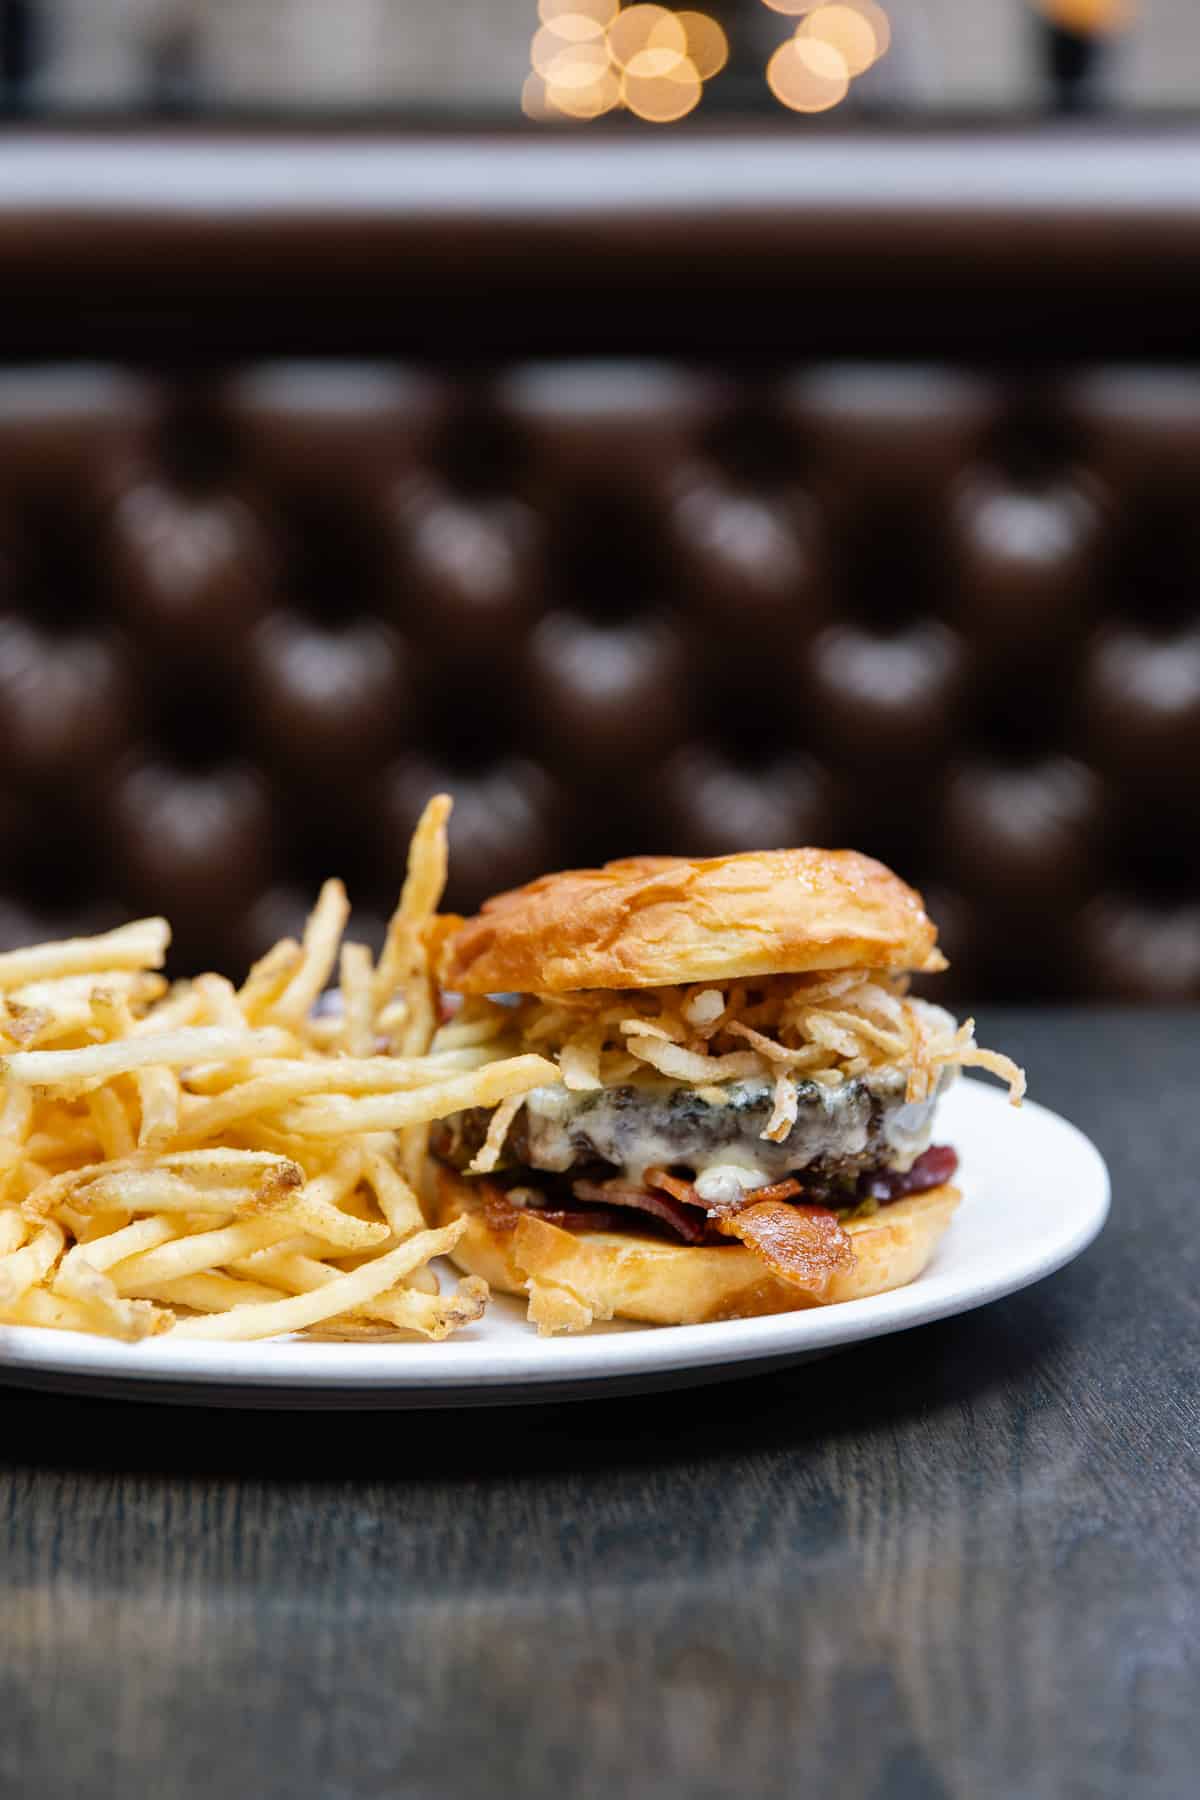 Woodie Fisher's Burger - with Havarti Cheese, smoked bacon, crispy onions, worcestershire aioli, relish and a side of delightfully crispy shoestring fries